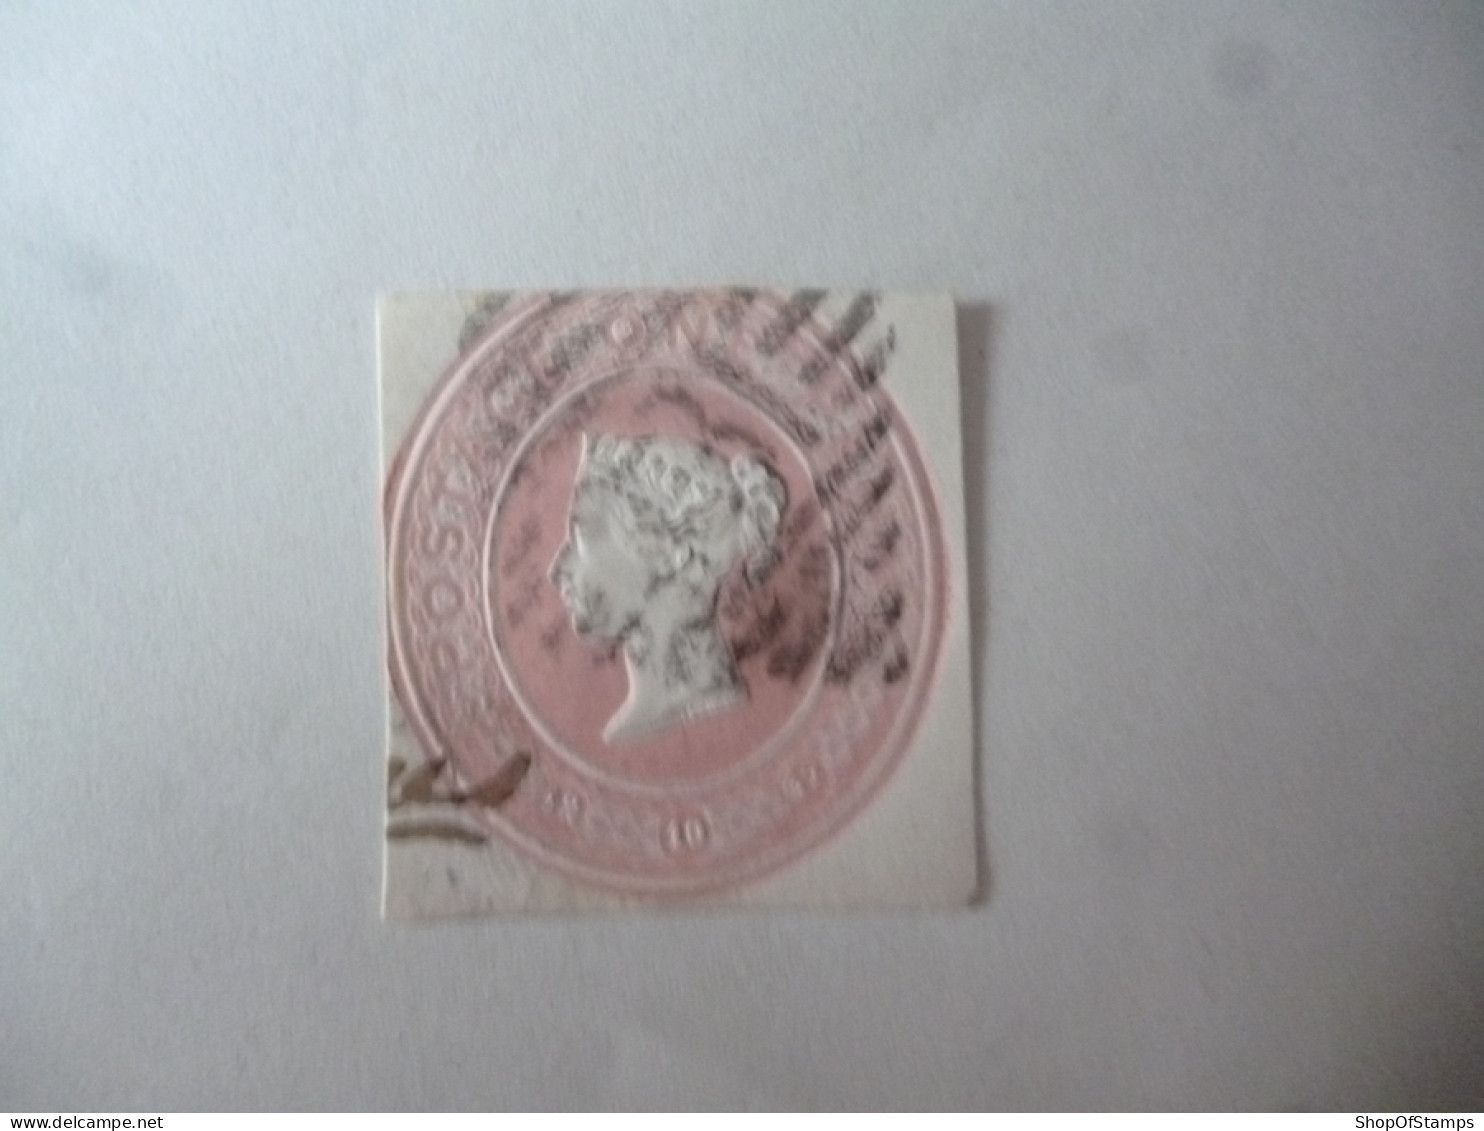 GREAT BRITAIN-POSTAL HISTORY QV EMBOSS CUT OUT WITH NUMBERED CANCELLATION - Marcofilia